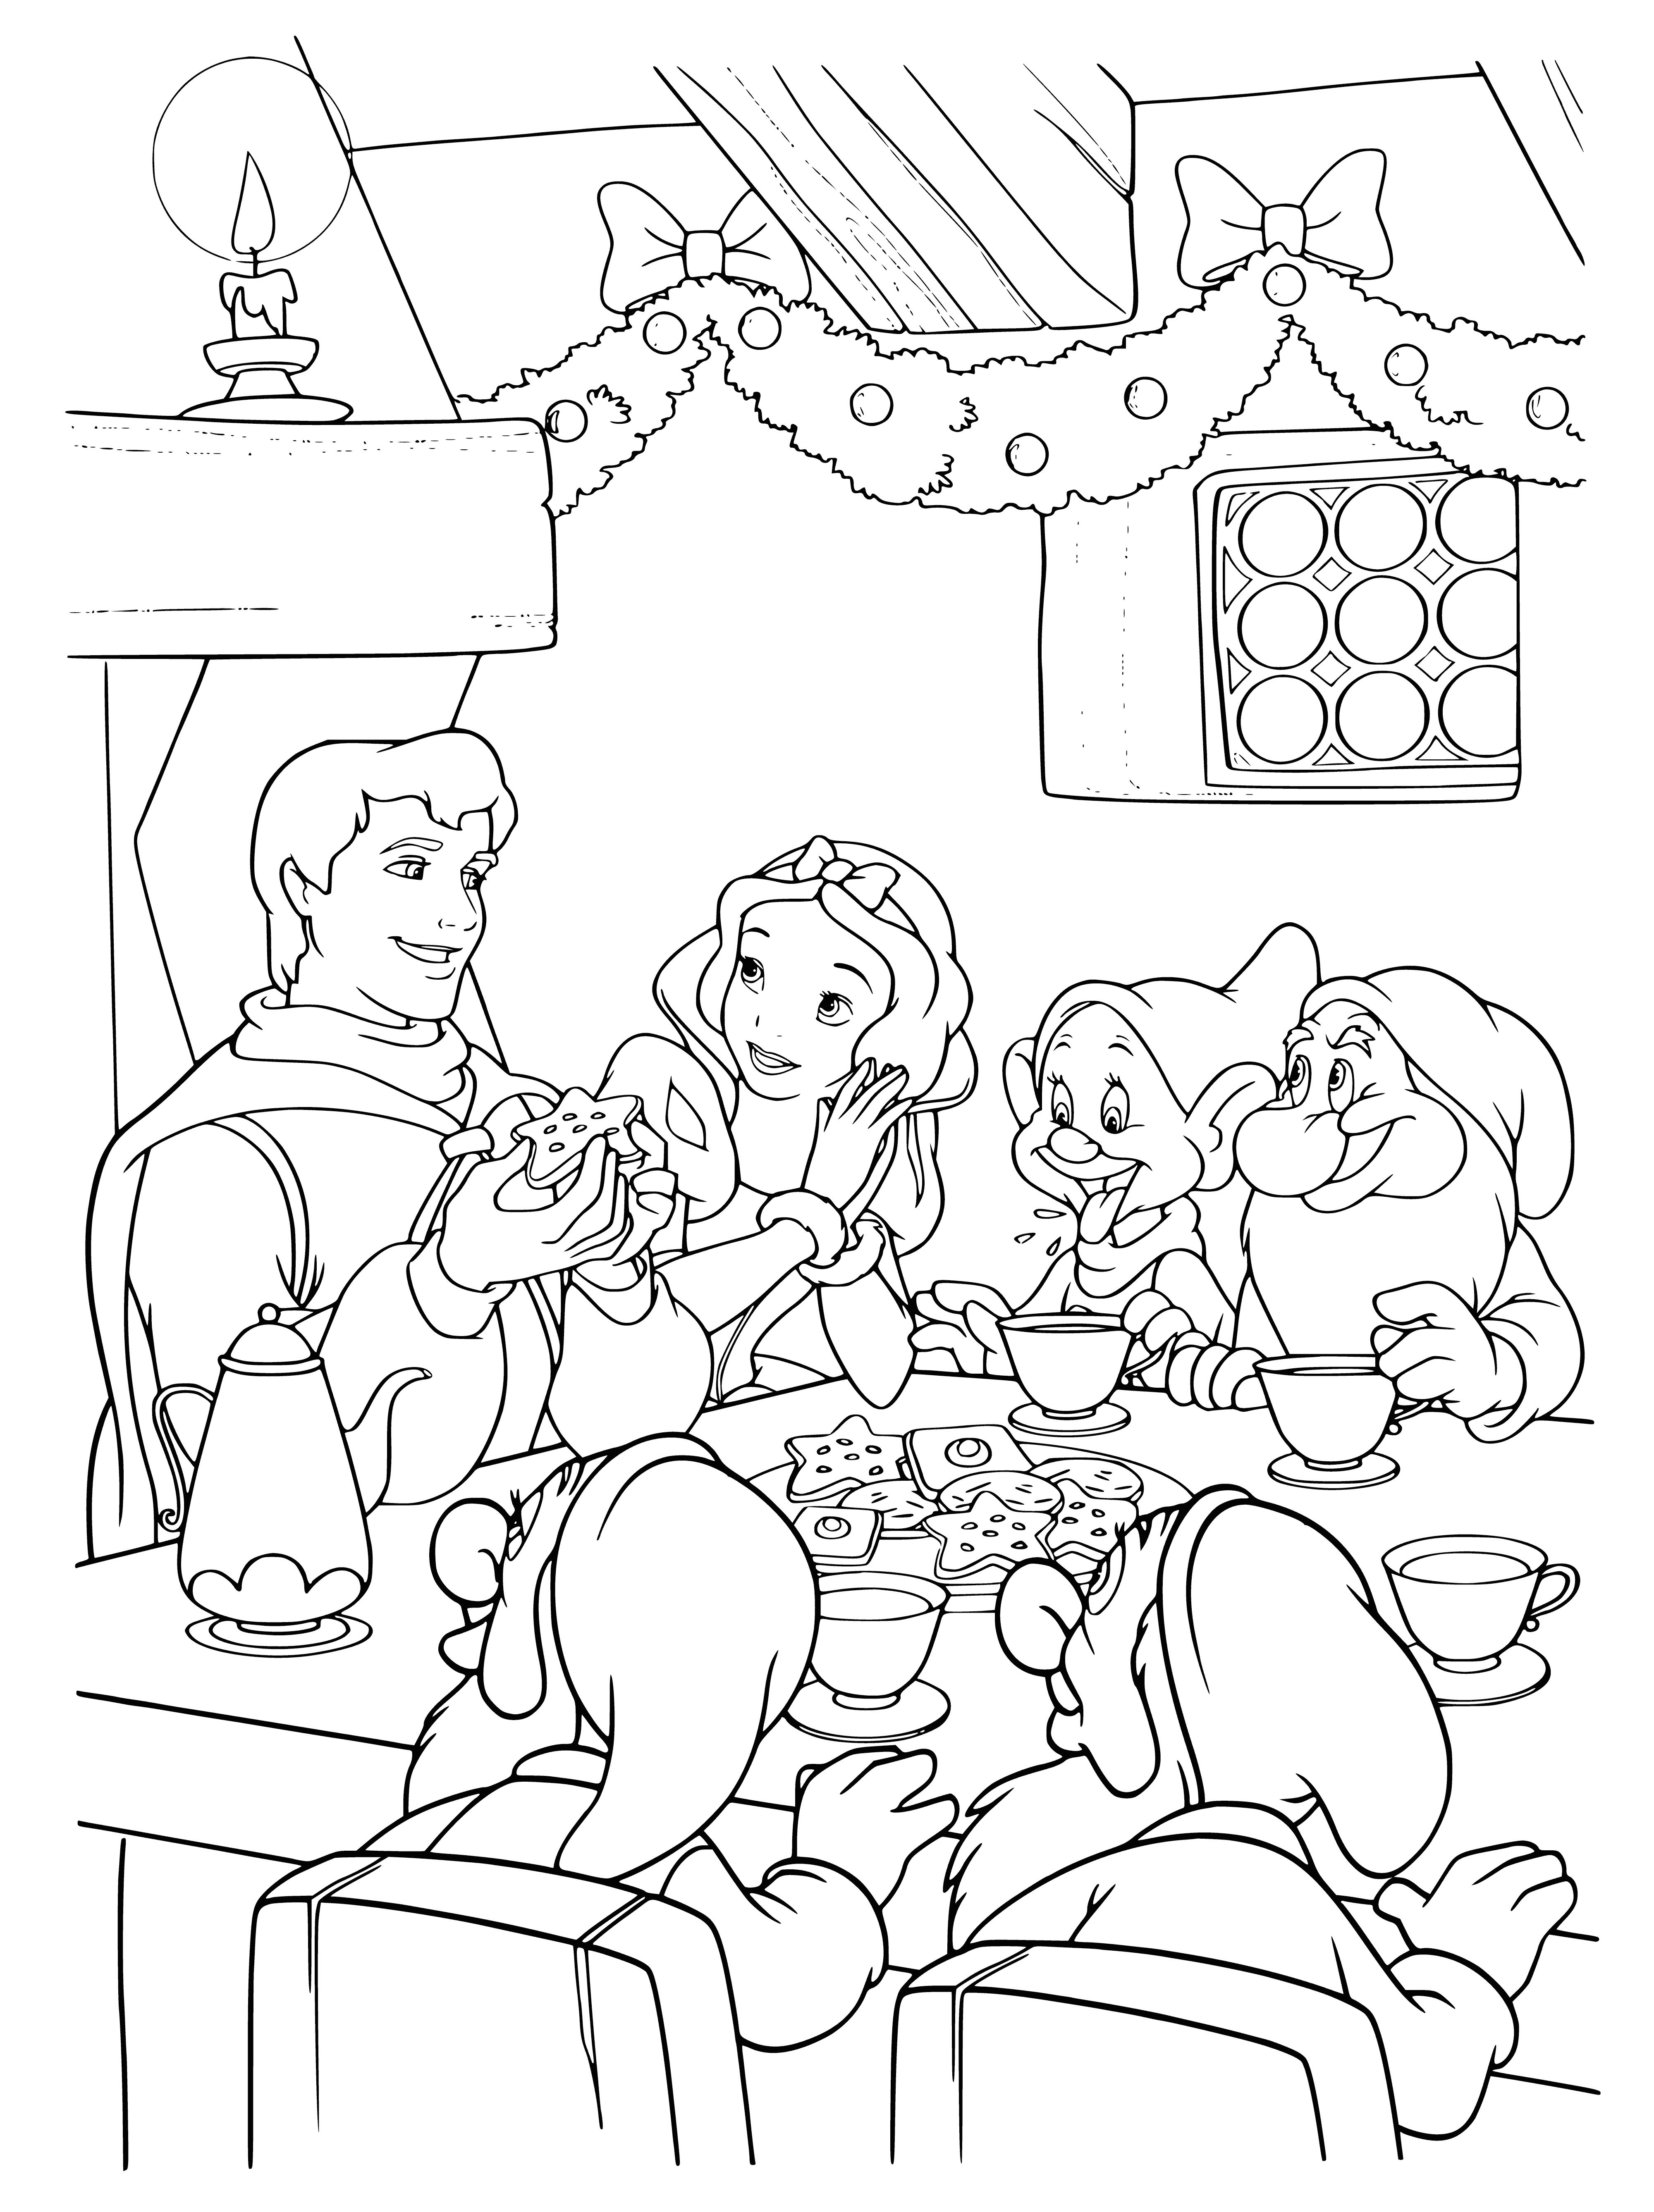 coloring page: Disney princesses celebrate the New Year with a big cake, candles, streamers, and confetti. Smiling and having a great time!